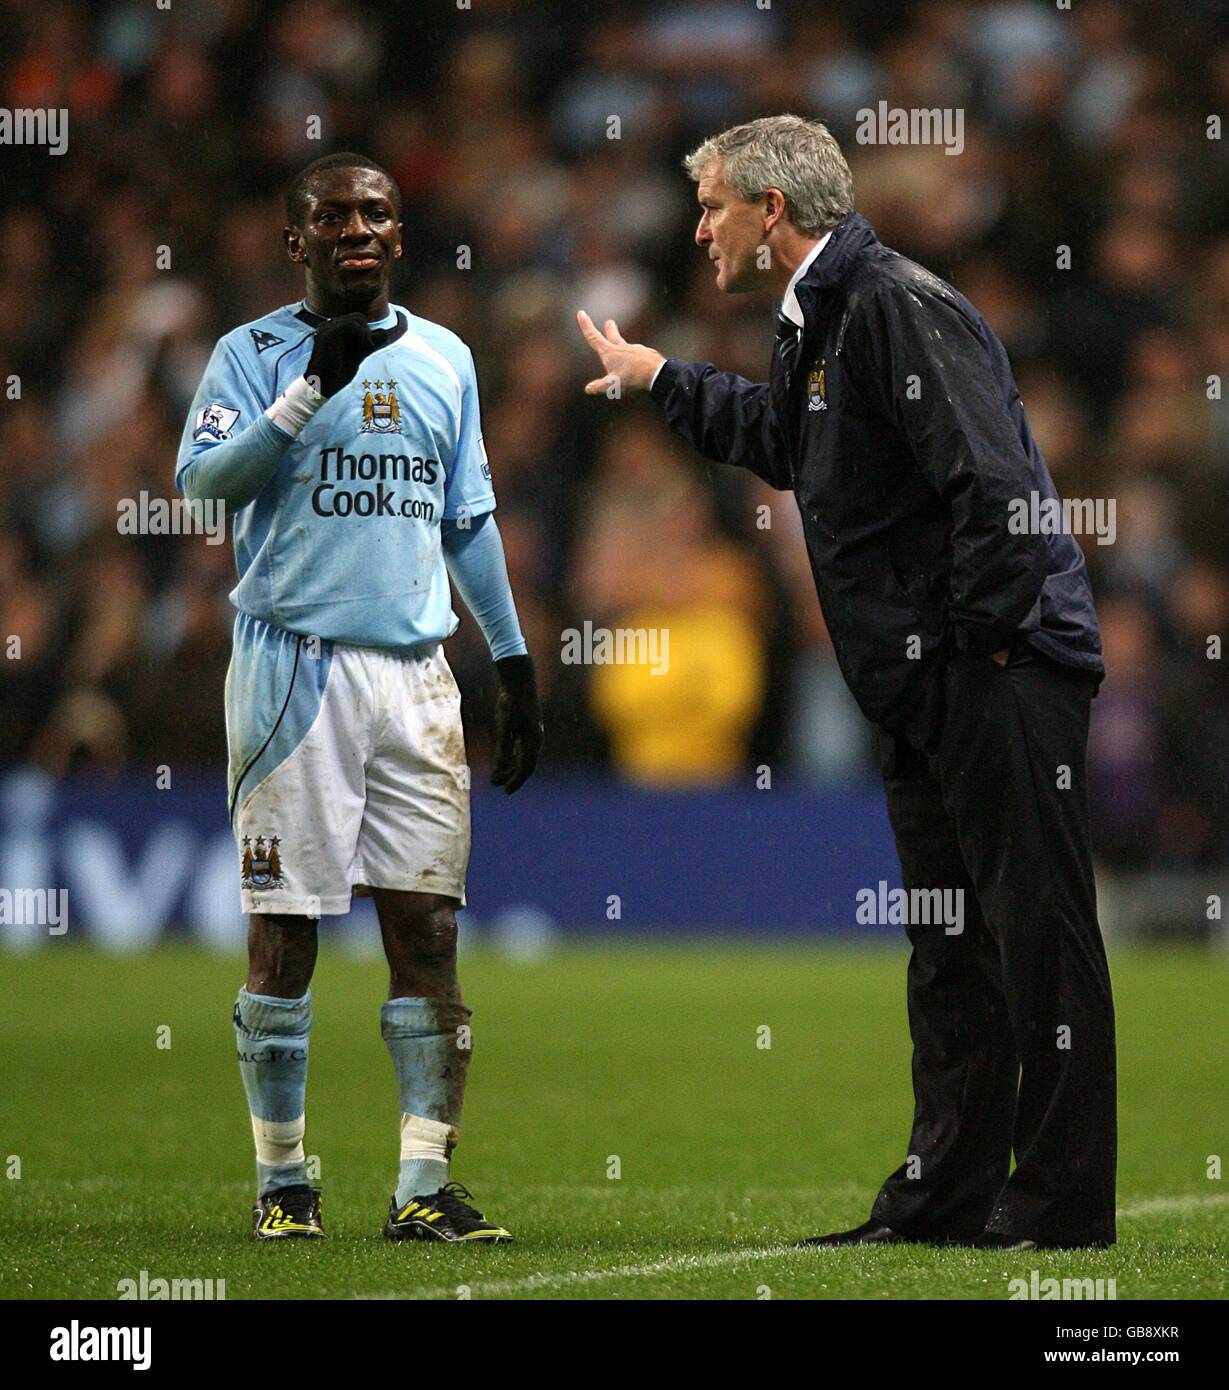 Soccer - Barclays Premier League - Manchester City v Tottenham Hotspur - City of Manchester Stadium. Manchester City manager Mark Hughes gives instructions to Shaun Wright-Phillips on the touchline Stock Photo